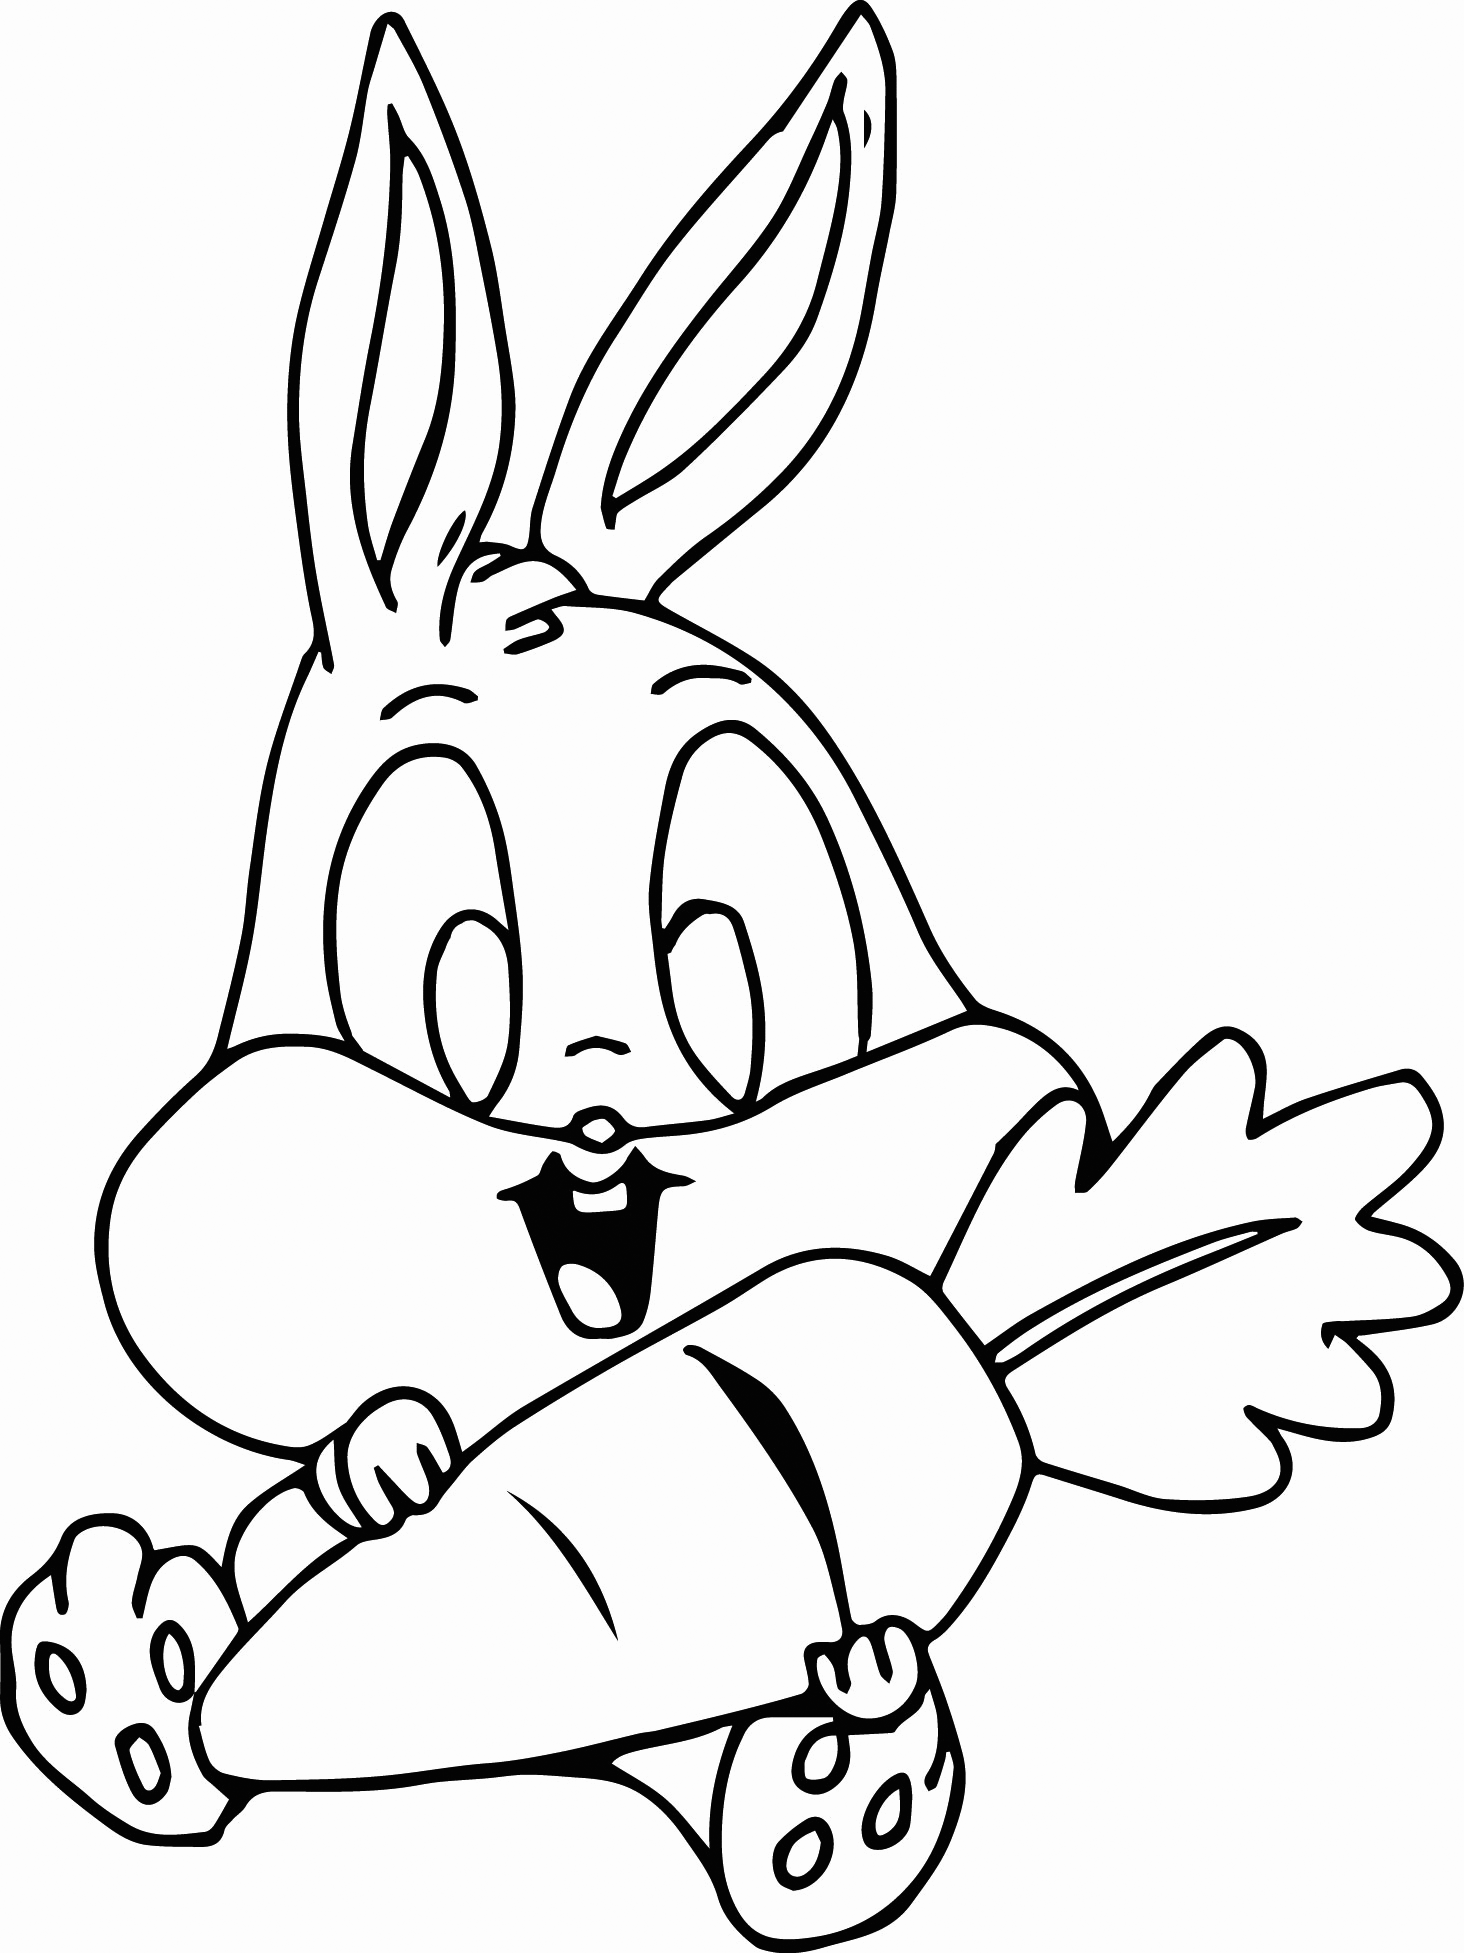 Carrot Coloring Pages Best Coloring Pages For Kids